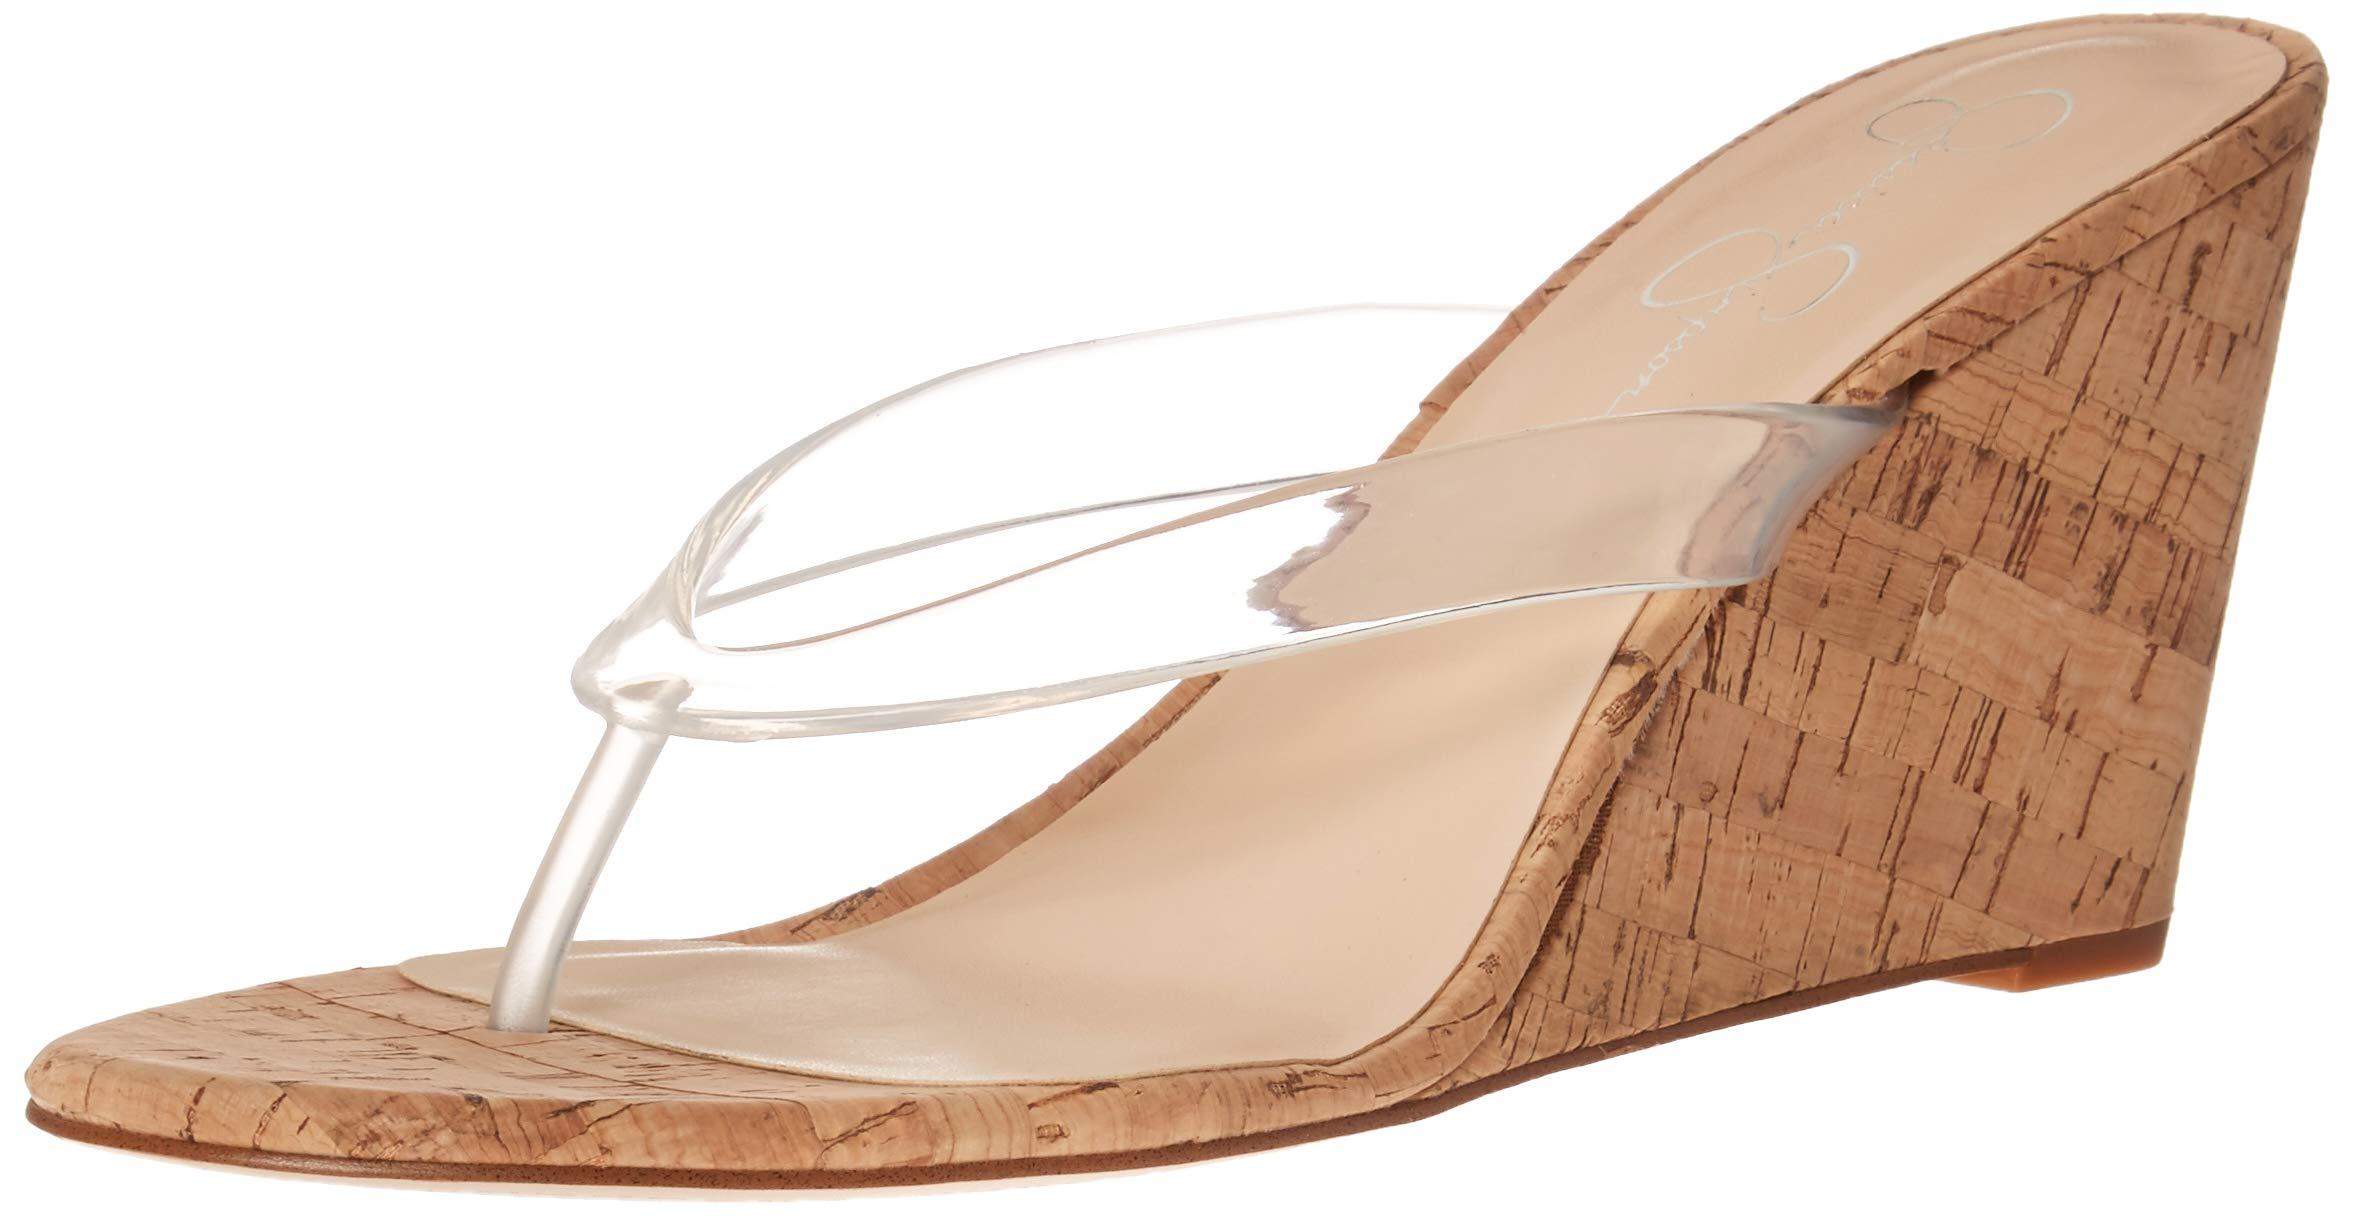 Jessica Simpson Coyrie Wedge Sandals,clear,8.5 M Us in Natural | Lyst